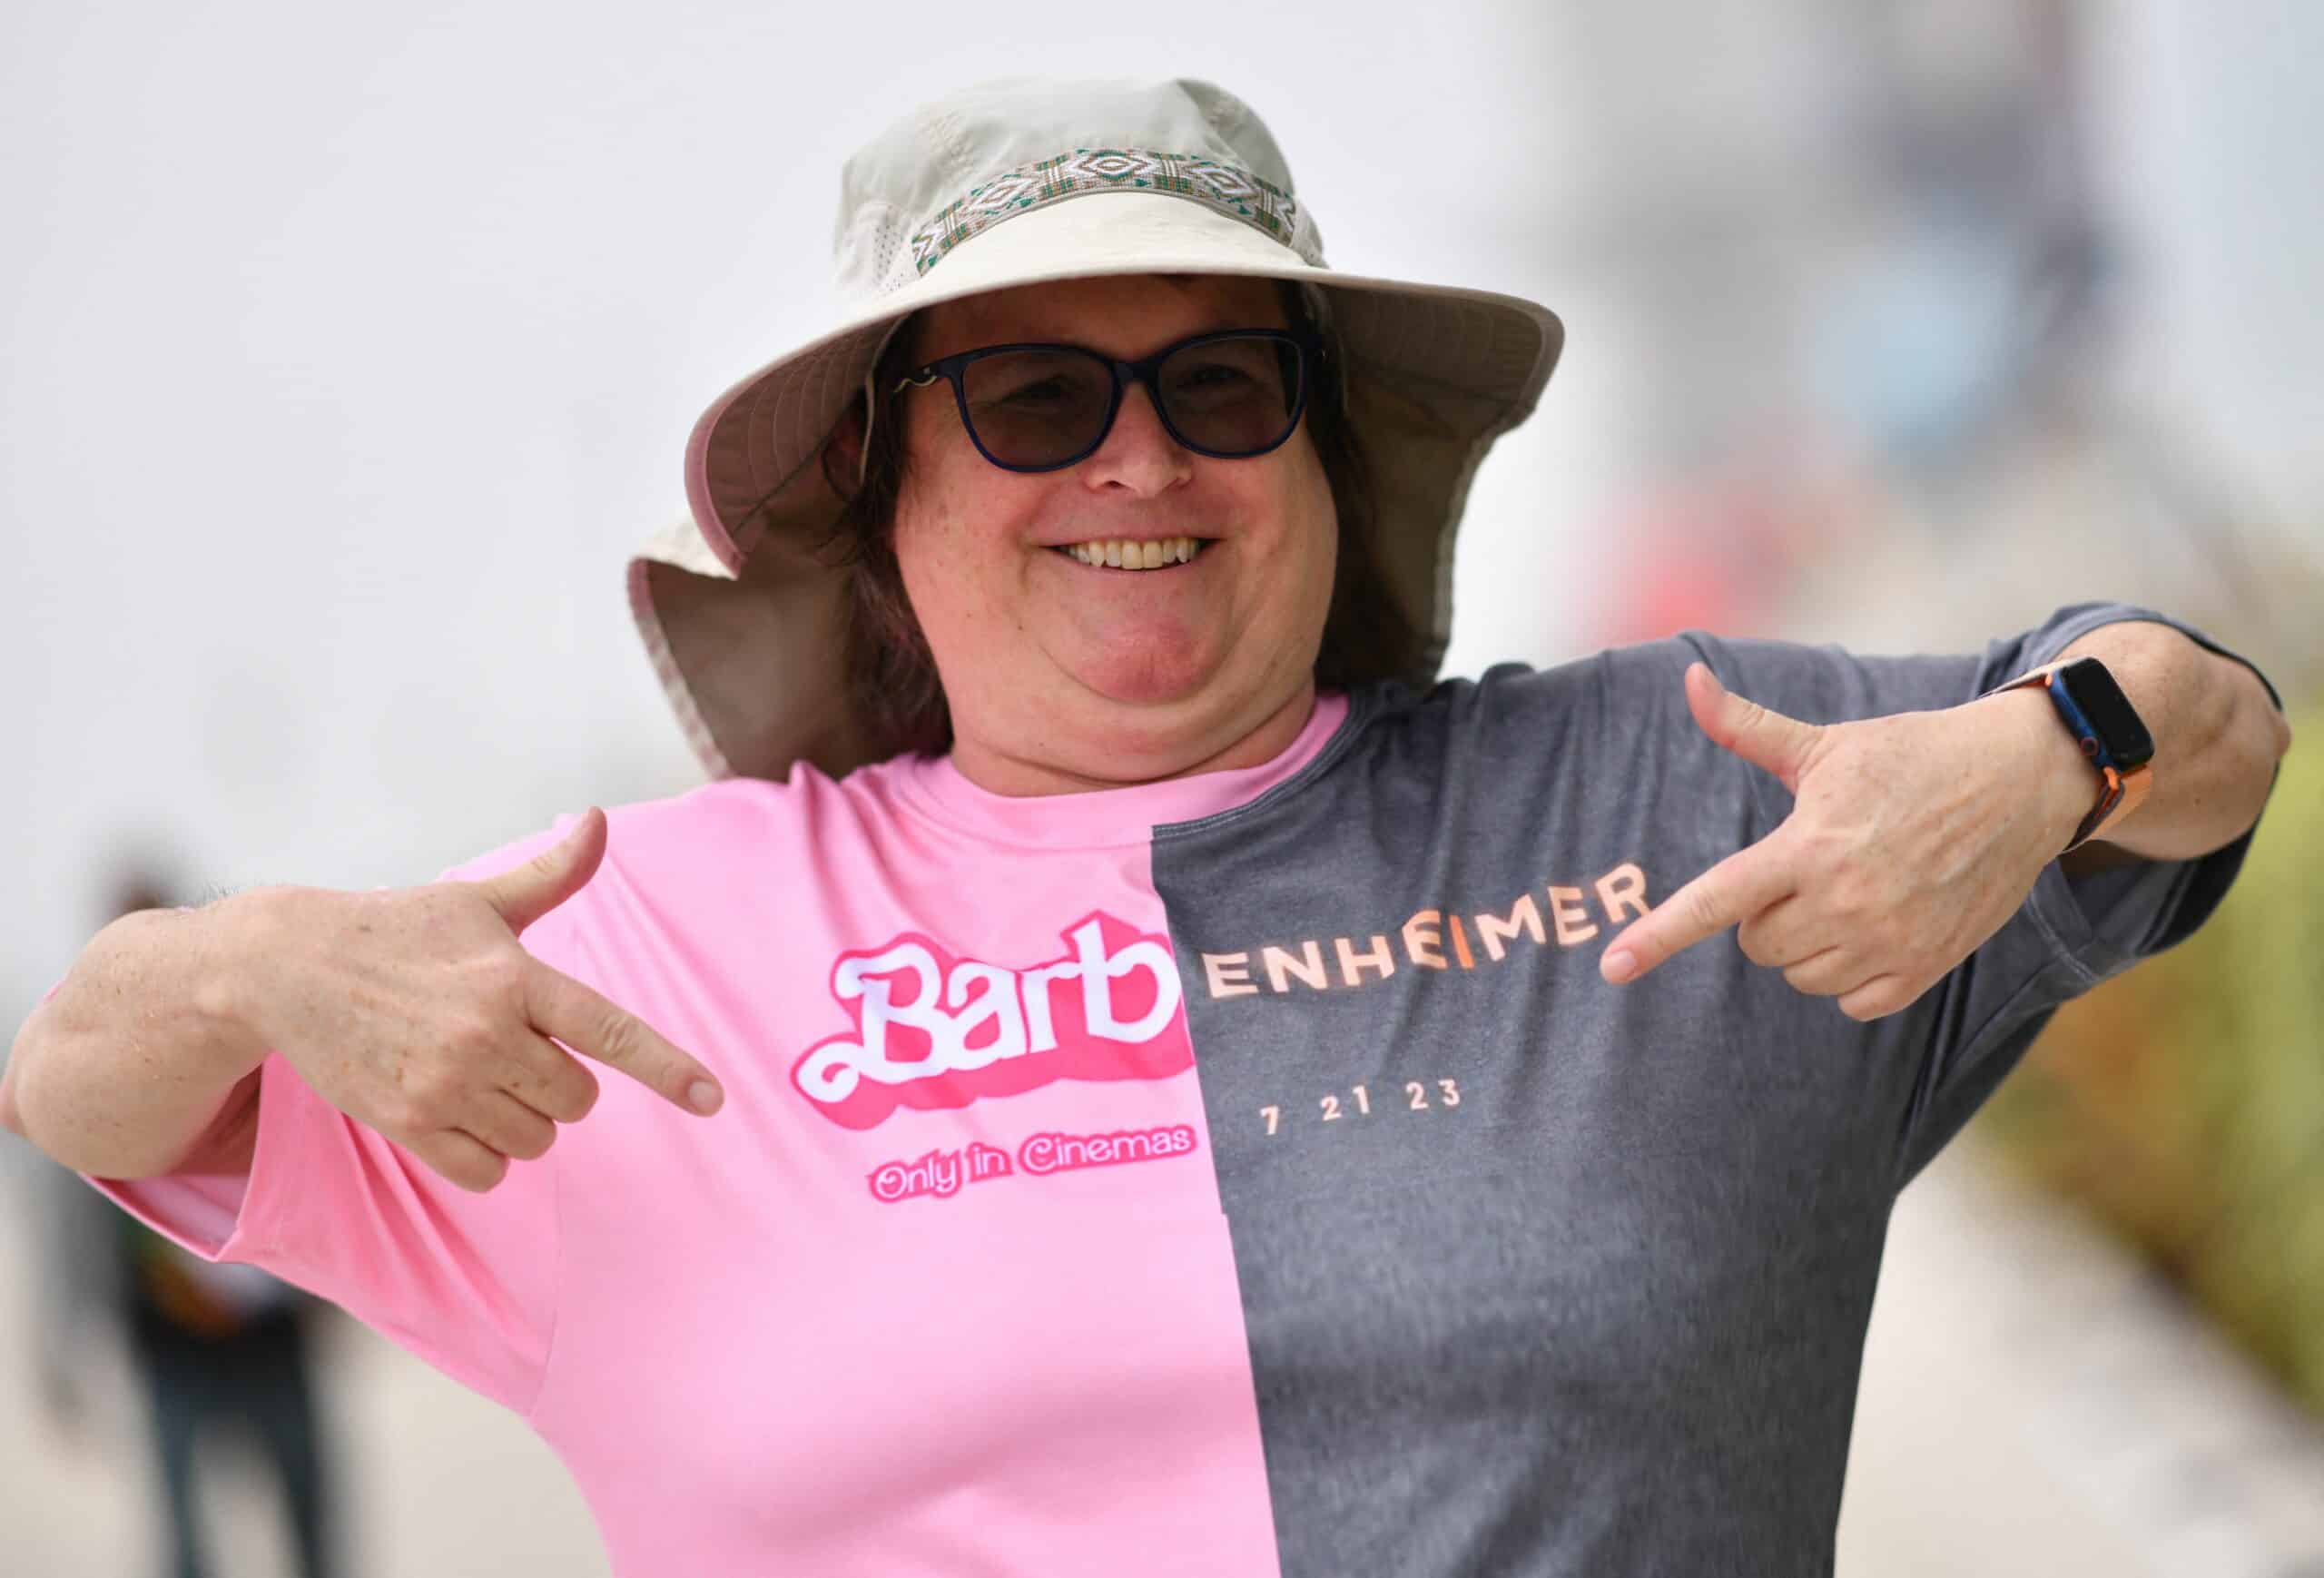 An attendee points at her Barbenheimer shirt outside the convention center during San Diego Comic-Con International in San Diego, California, on July 20, 2023.